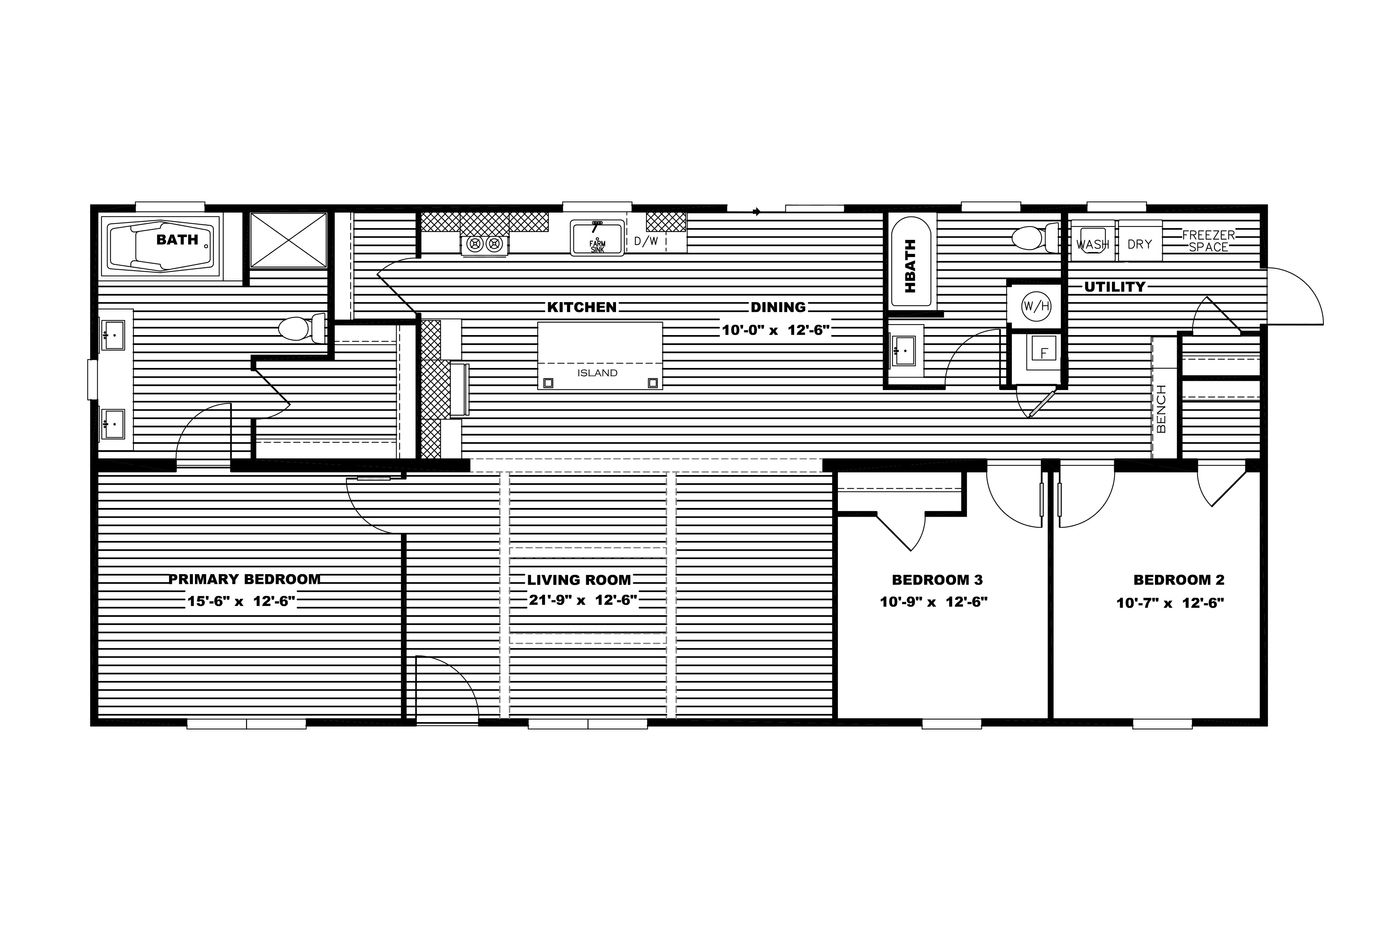 The FARMHOUSE 3 Floor Plan. This Manufactured Mobile Home features 3 bedrooms and 2 baths.